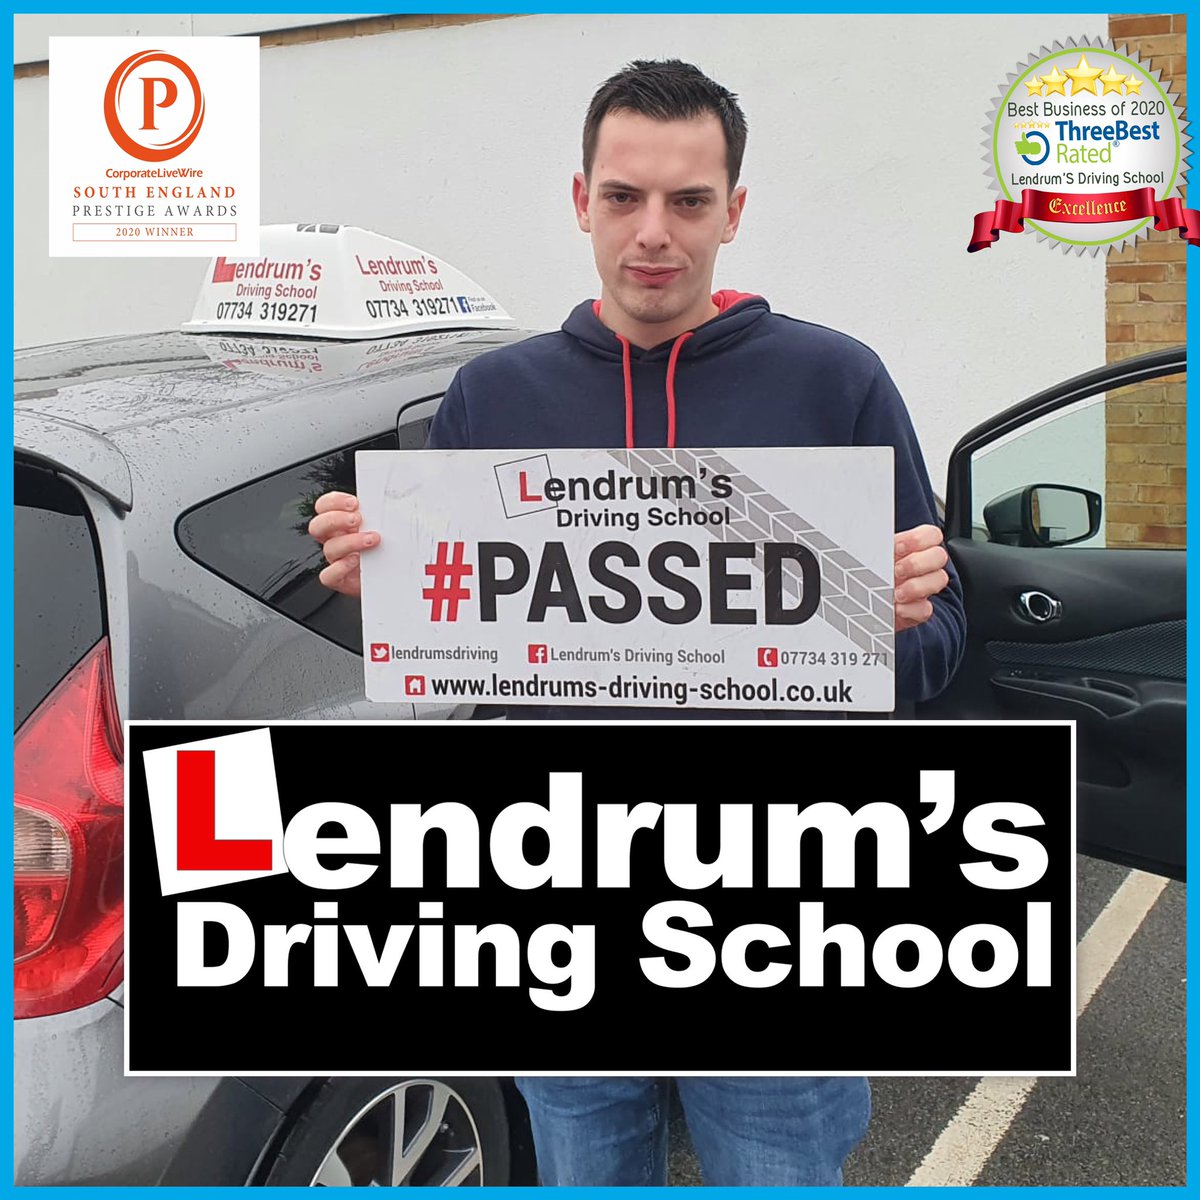 Congratulations to Luke who #passed his #drivingtest 1st time 🏆🥇🏆🥇🏆🥇 in #Southampton with #drivinginstructor Abde